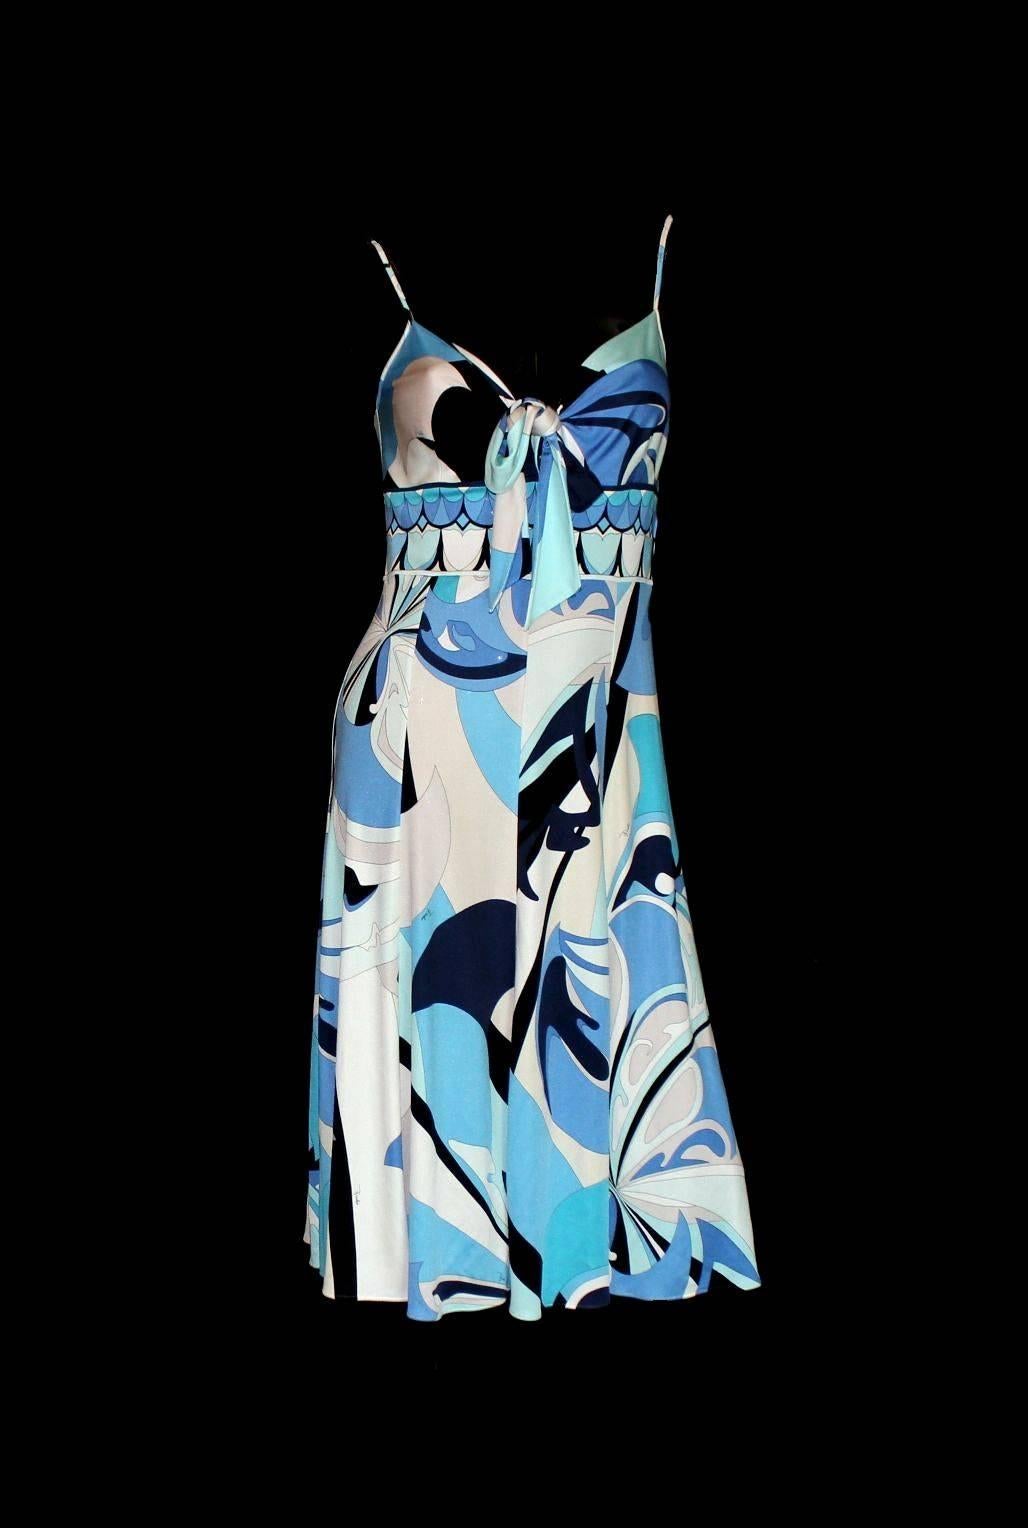 Beautiful Emilio Pucci dress
Made of softest silk jersey
Signature print in beautiful blue and beige colors
